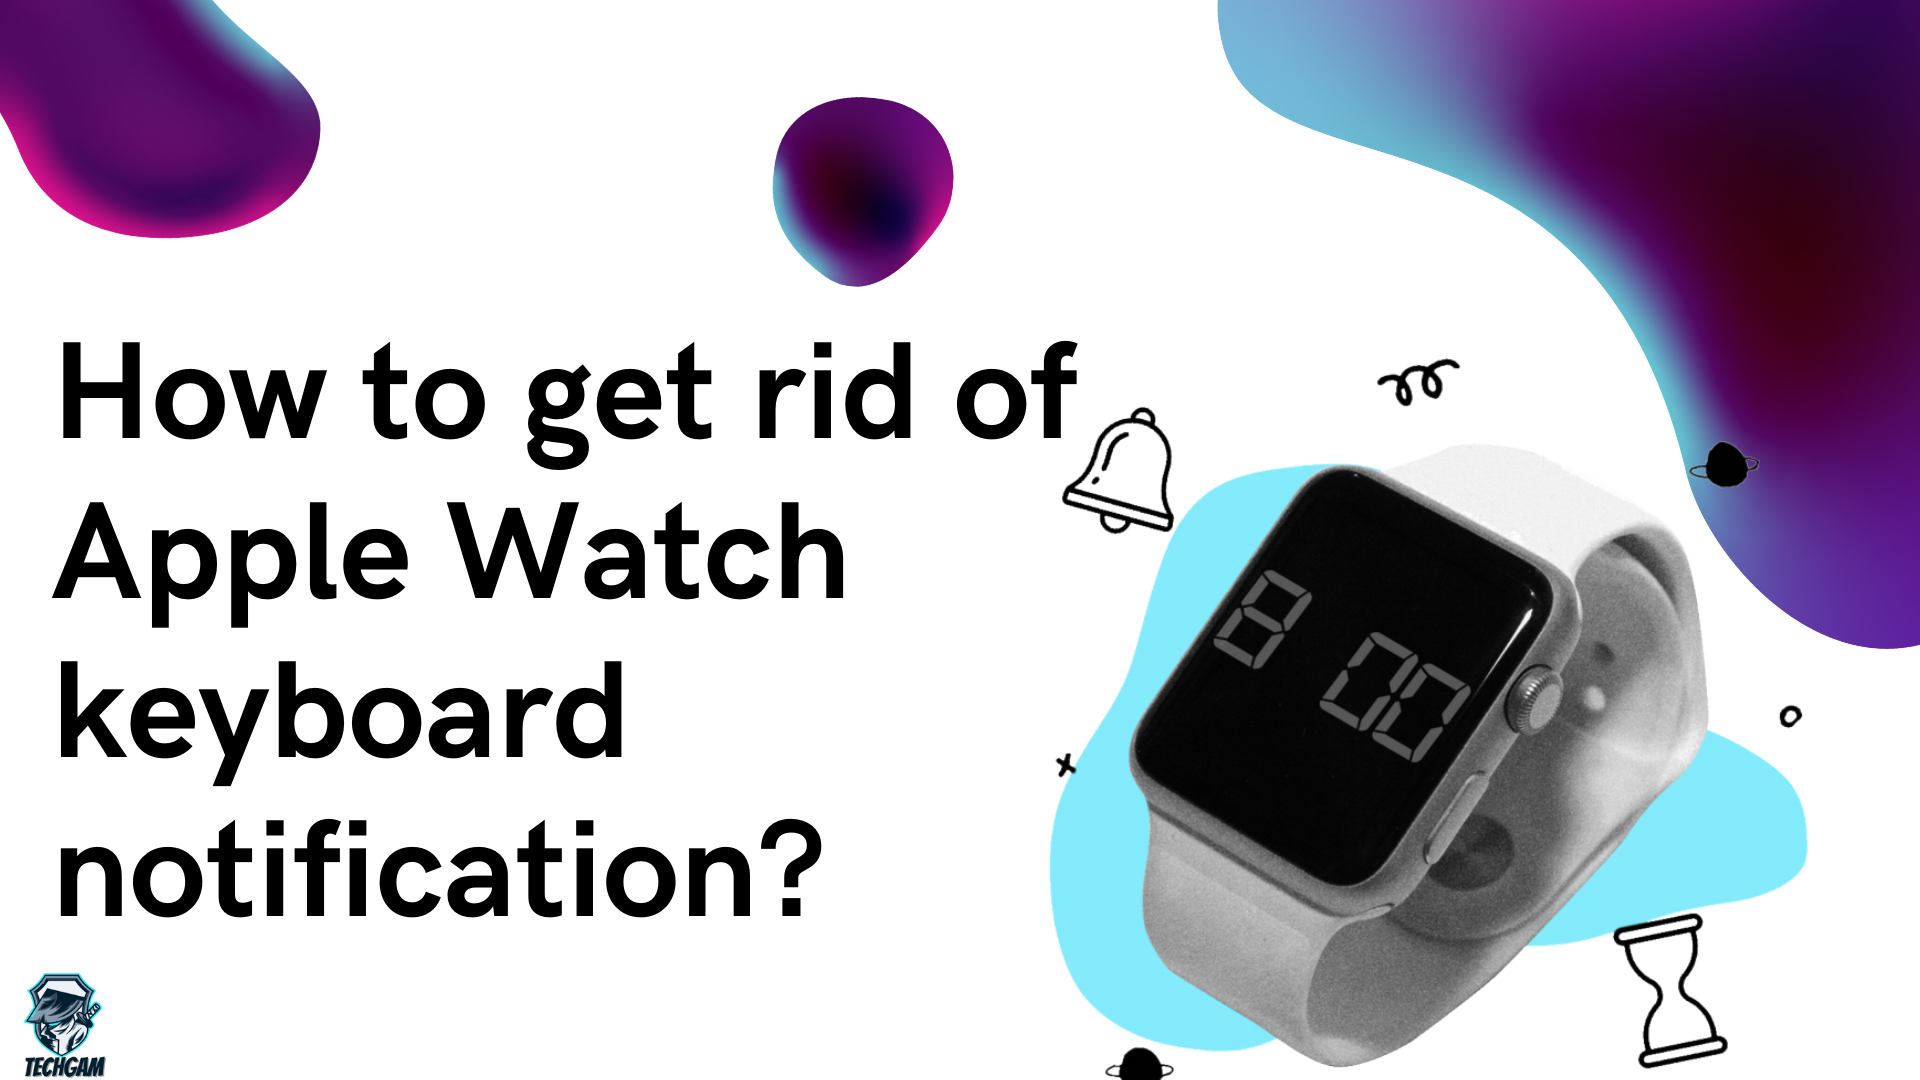 How to get rid of Apple Watch keyboard notification